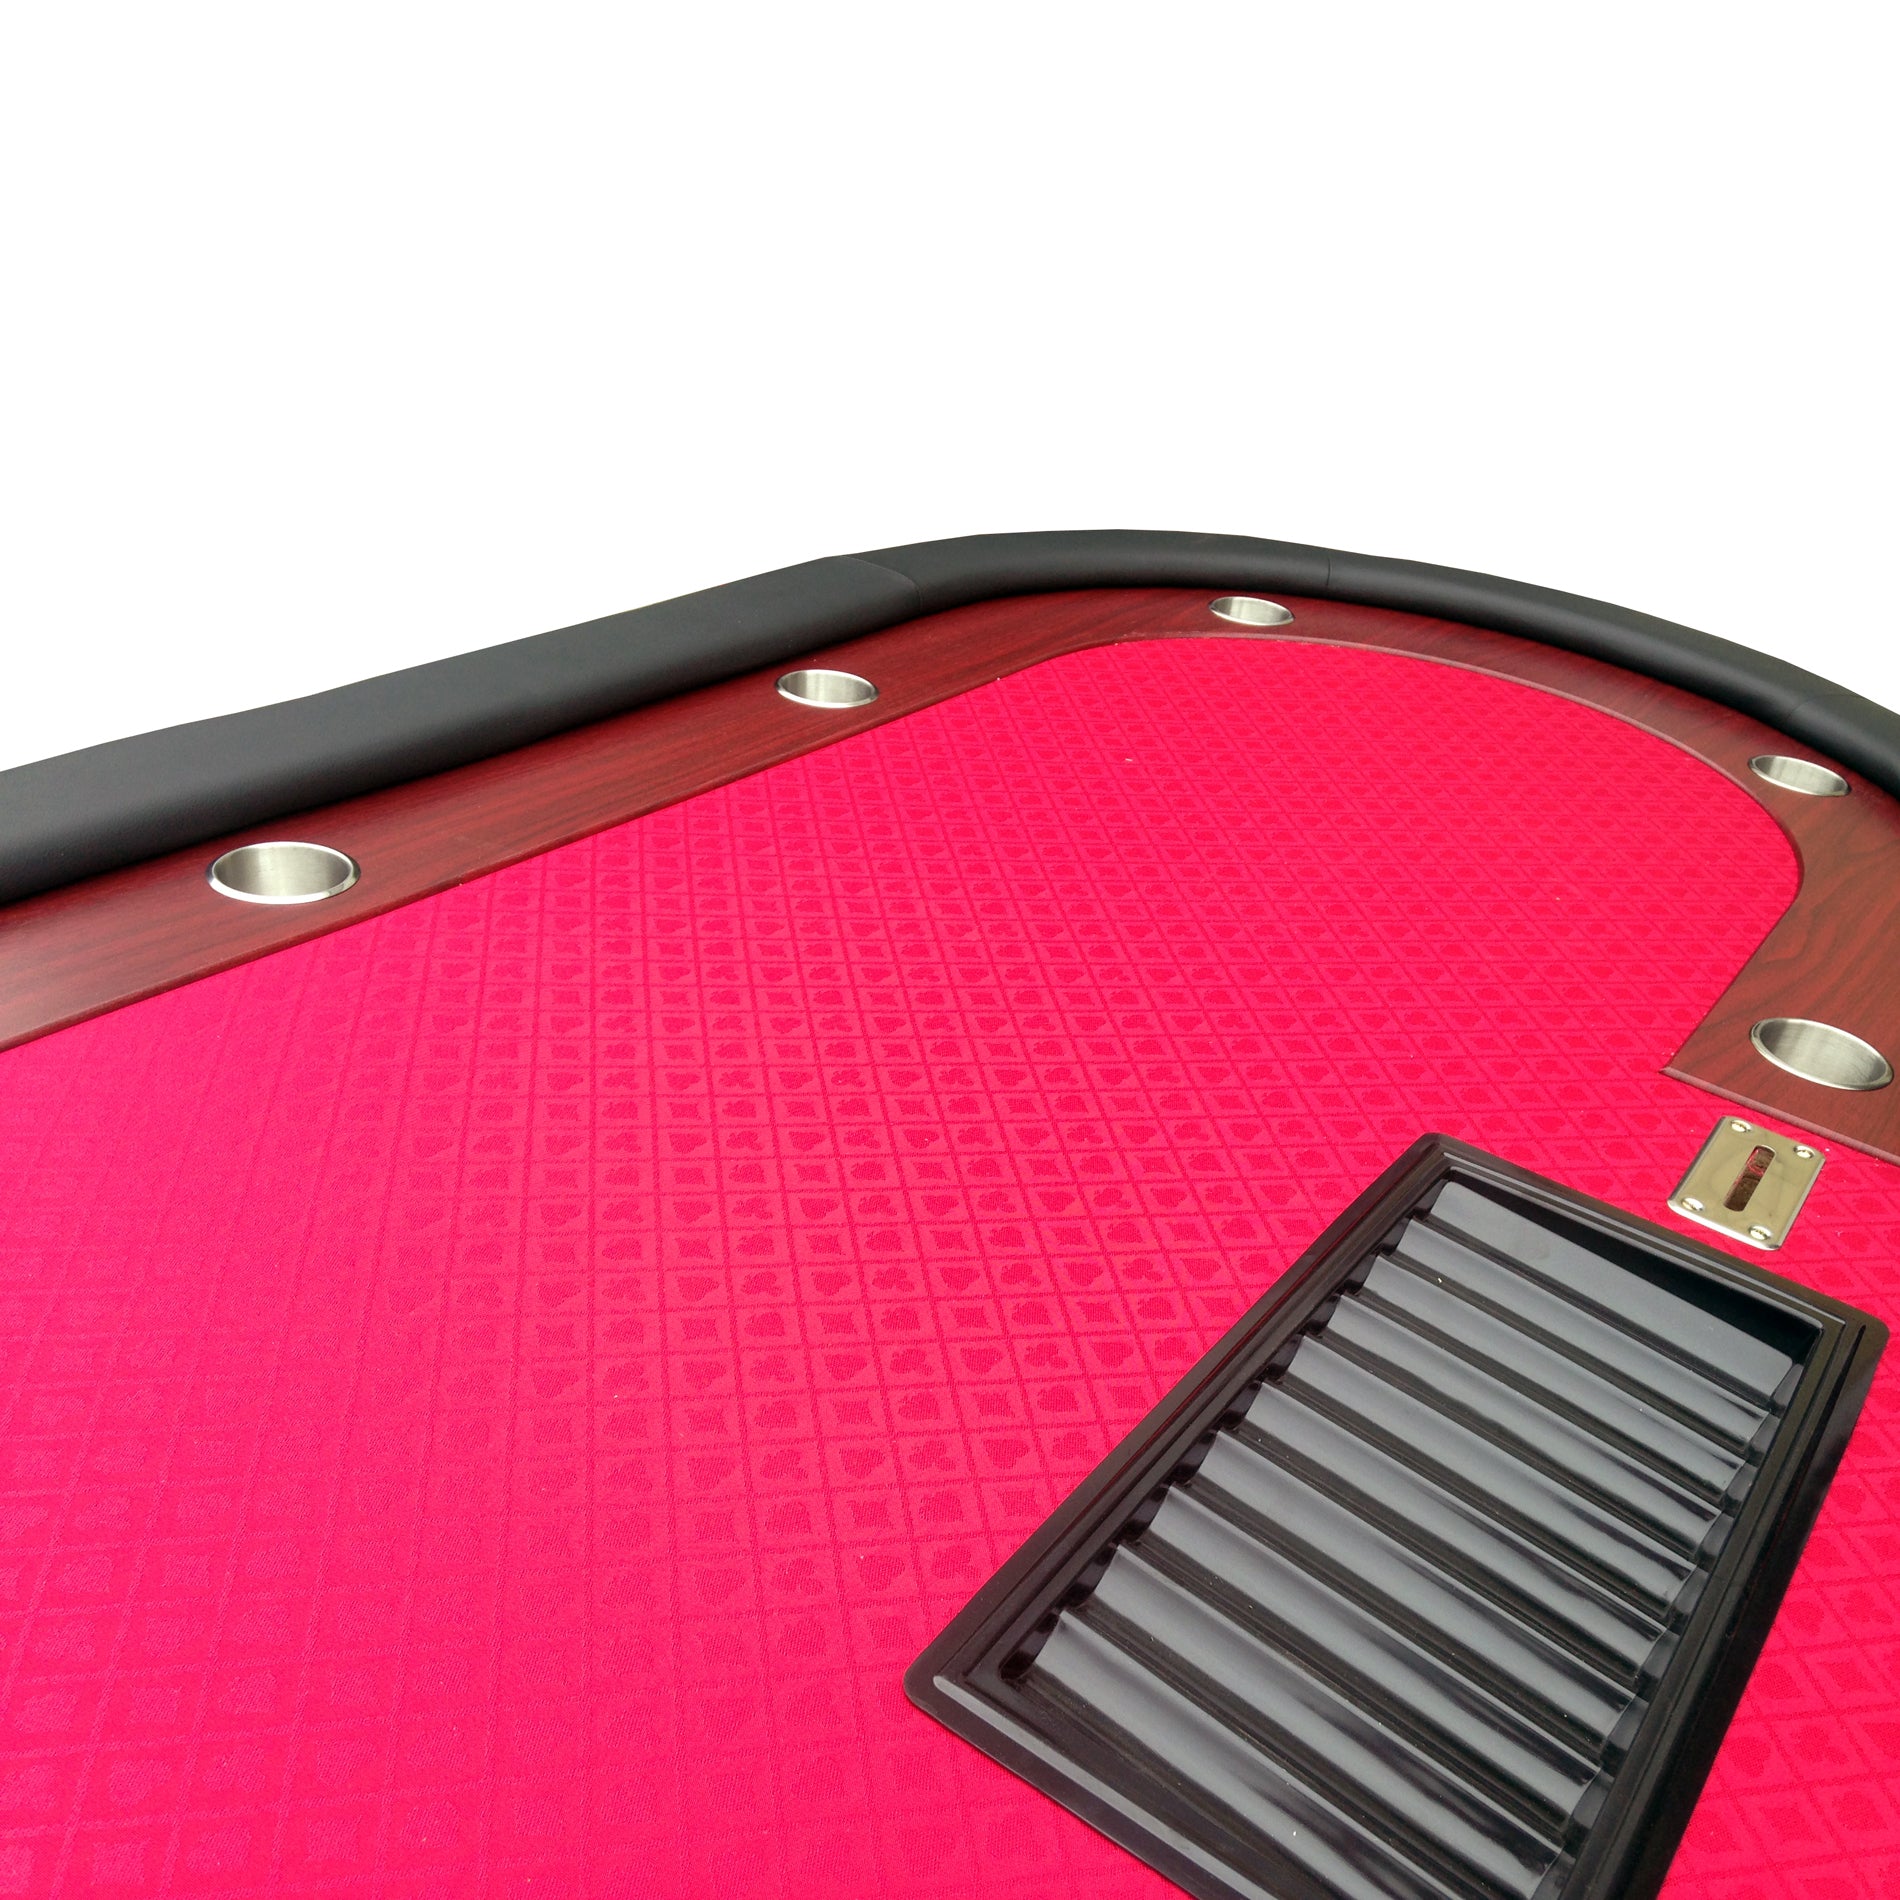 96" 9 Players Luna Red Felt Casino Game red-wood